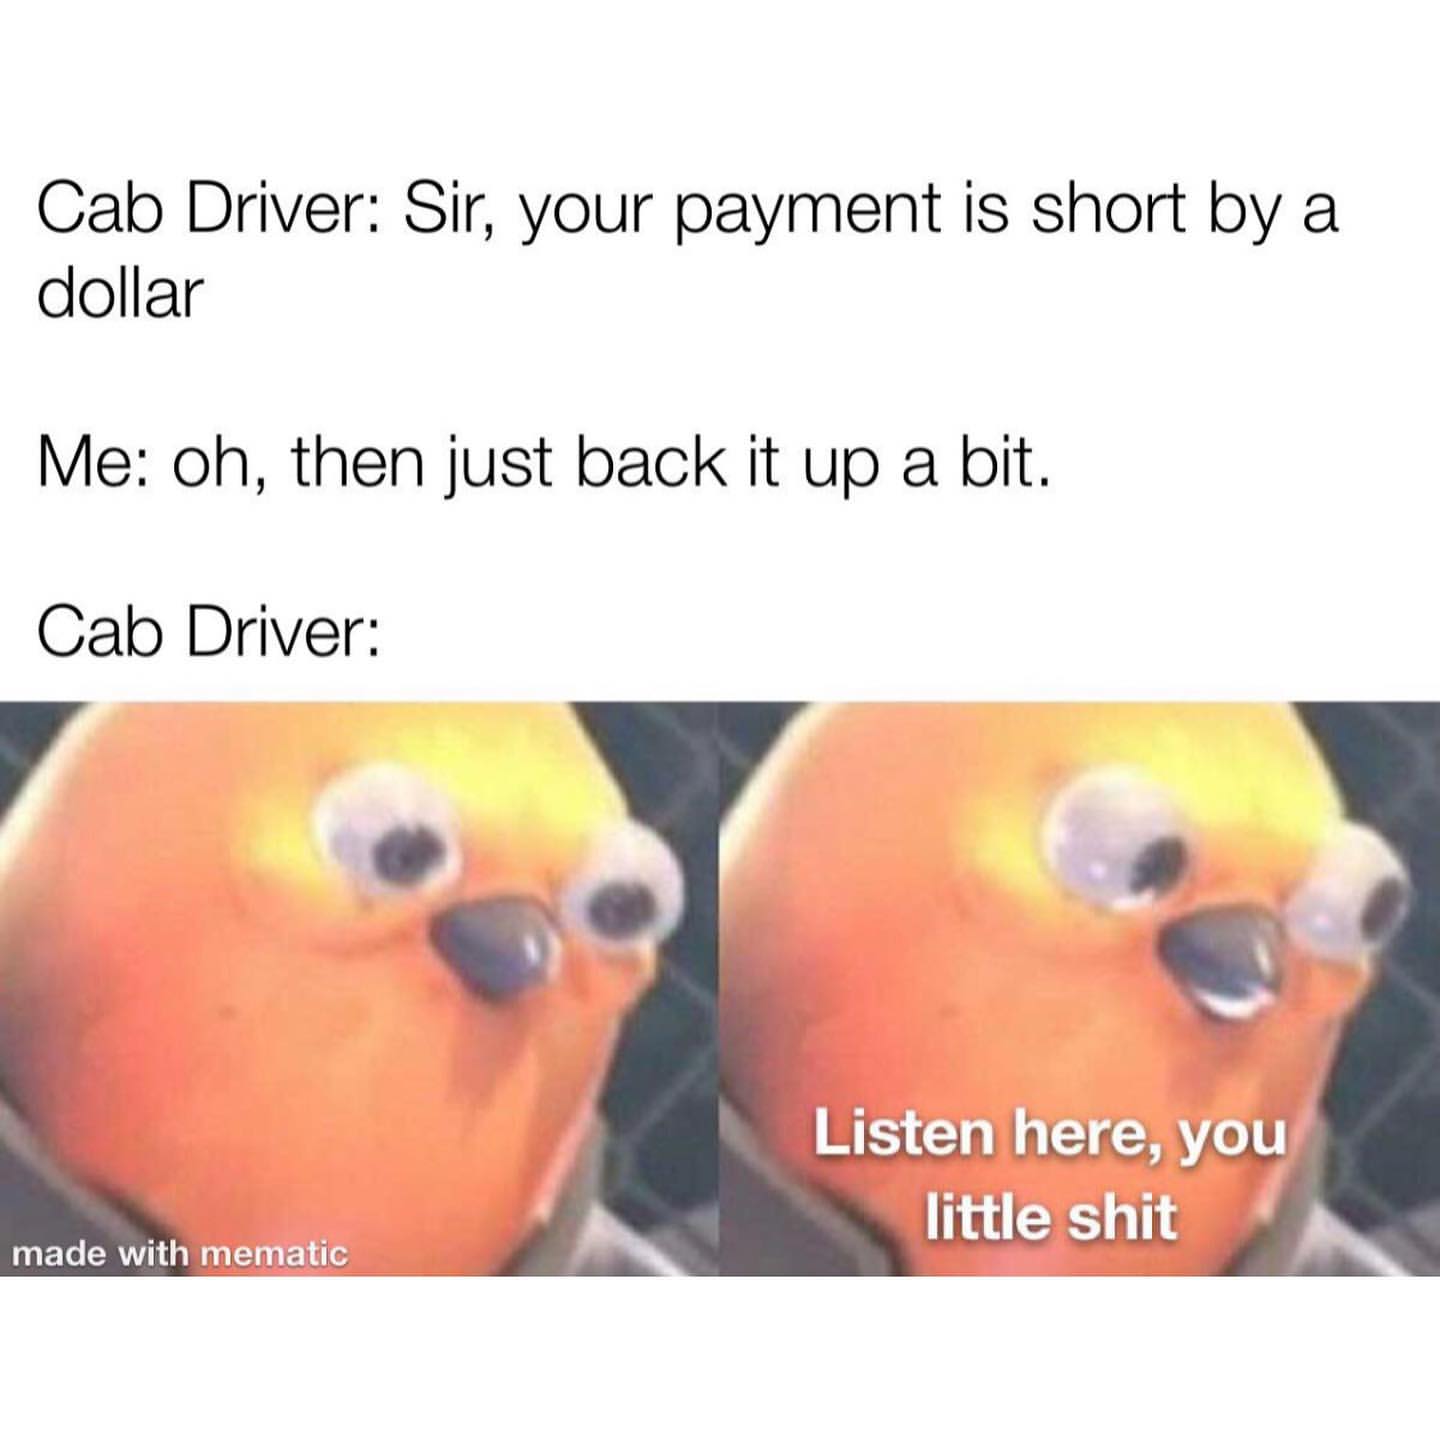 Cab Driver: Sir, your payment is short by a dollar. Me: Oh, then just back it up a bit. Cab Driver: Listen here, you little shit.